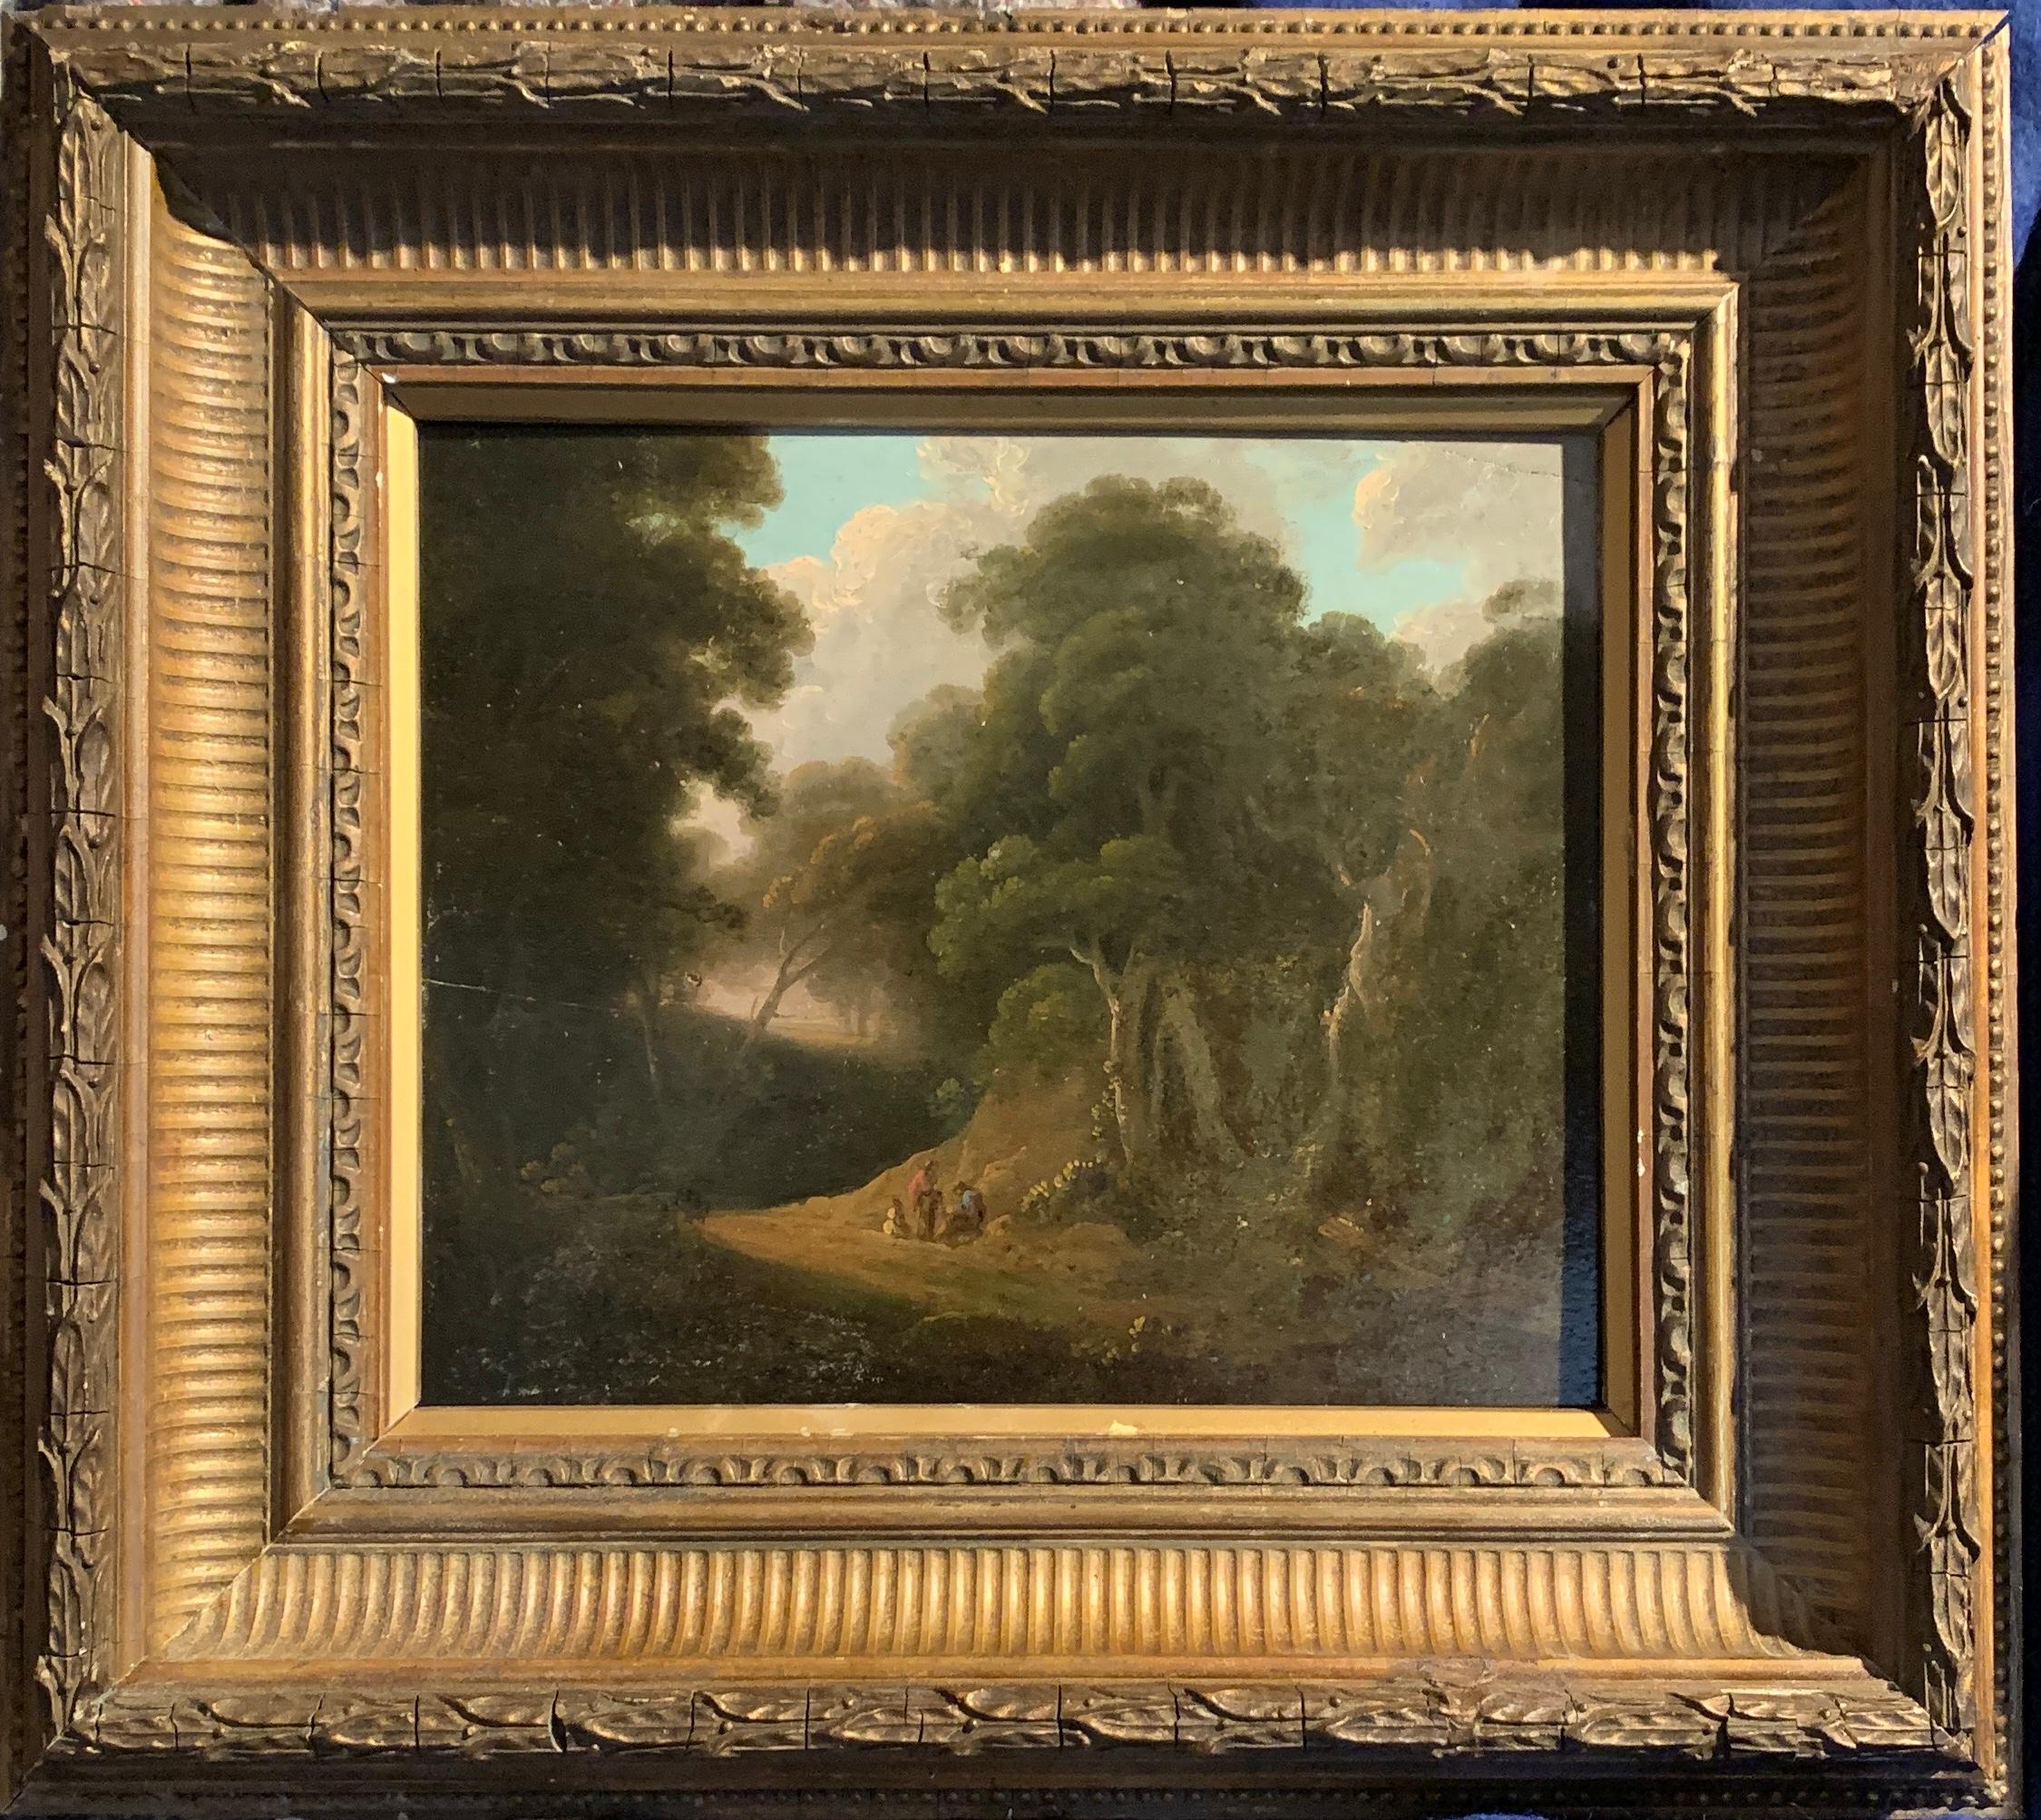 John Rathbone Figurative Painting - 18th century English tree lined landscape with a pathway with figures resting.